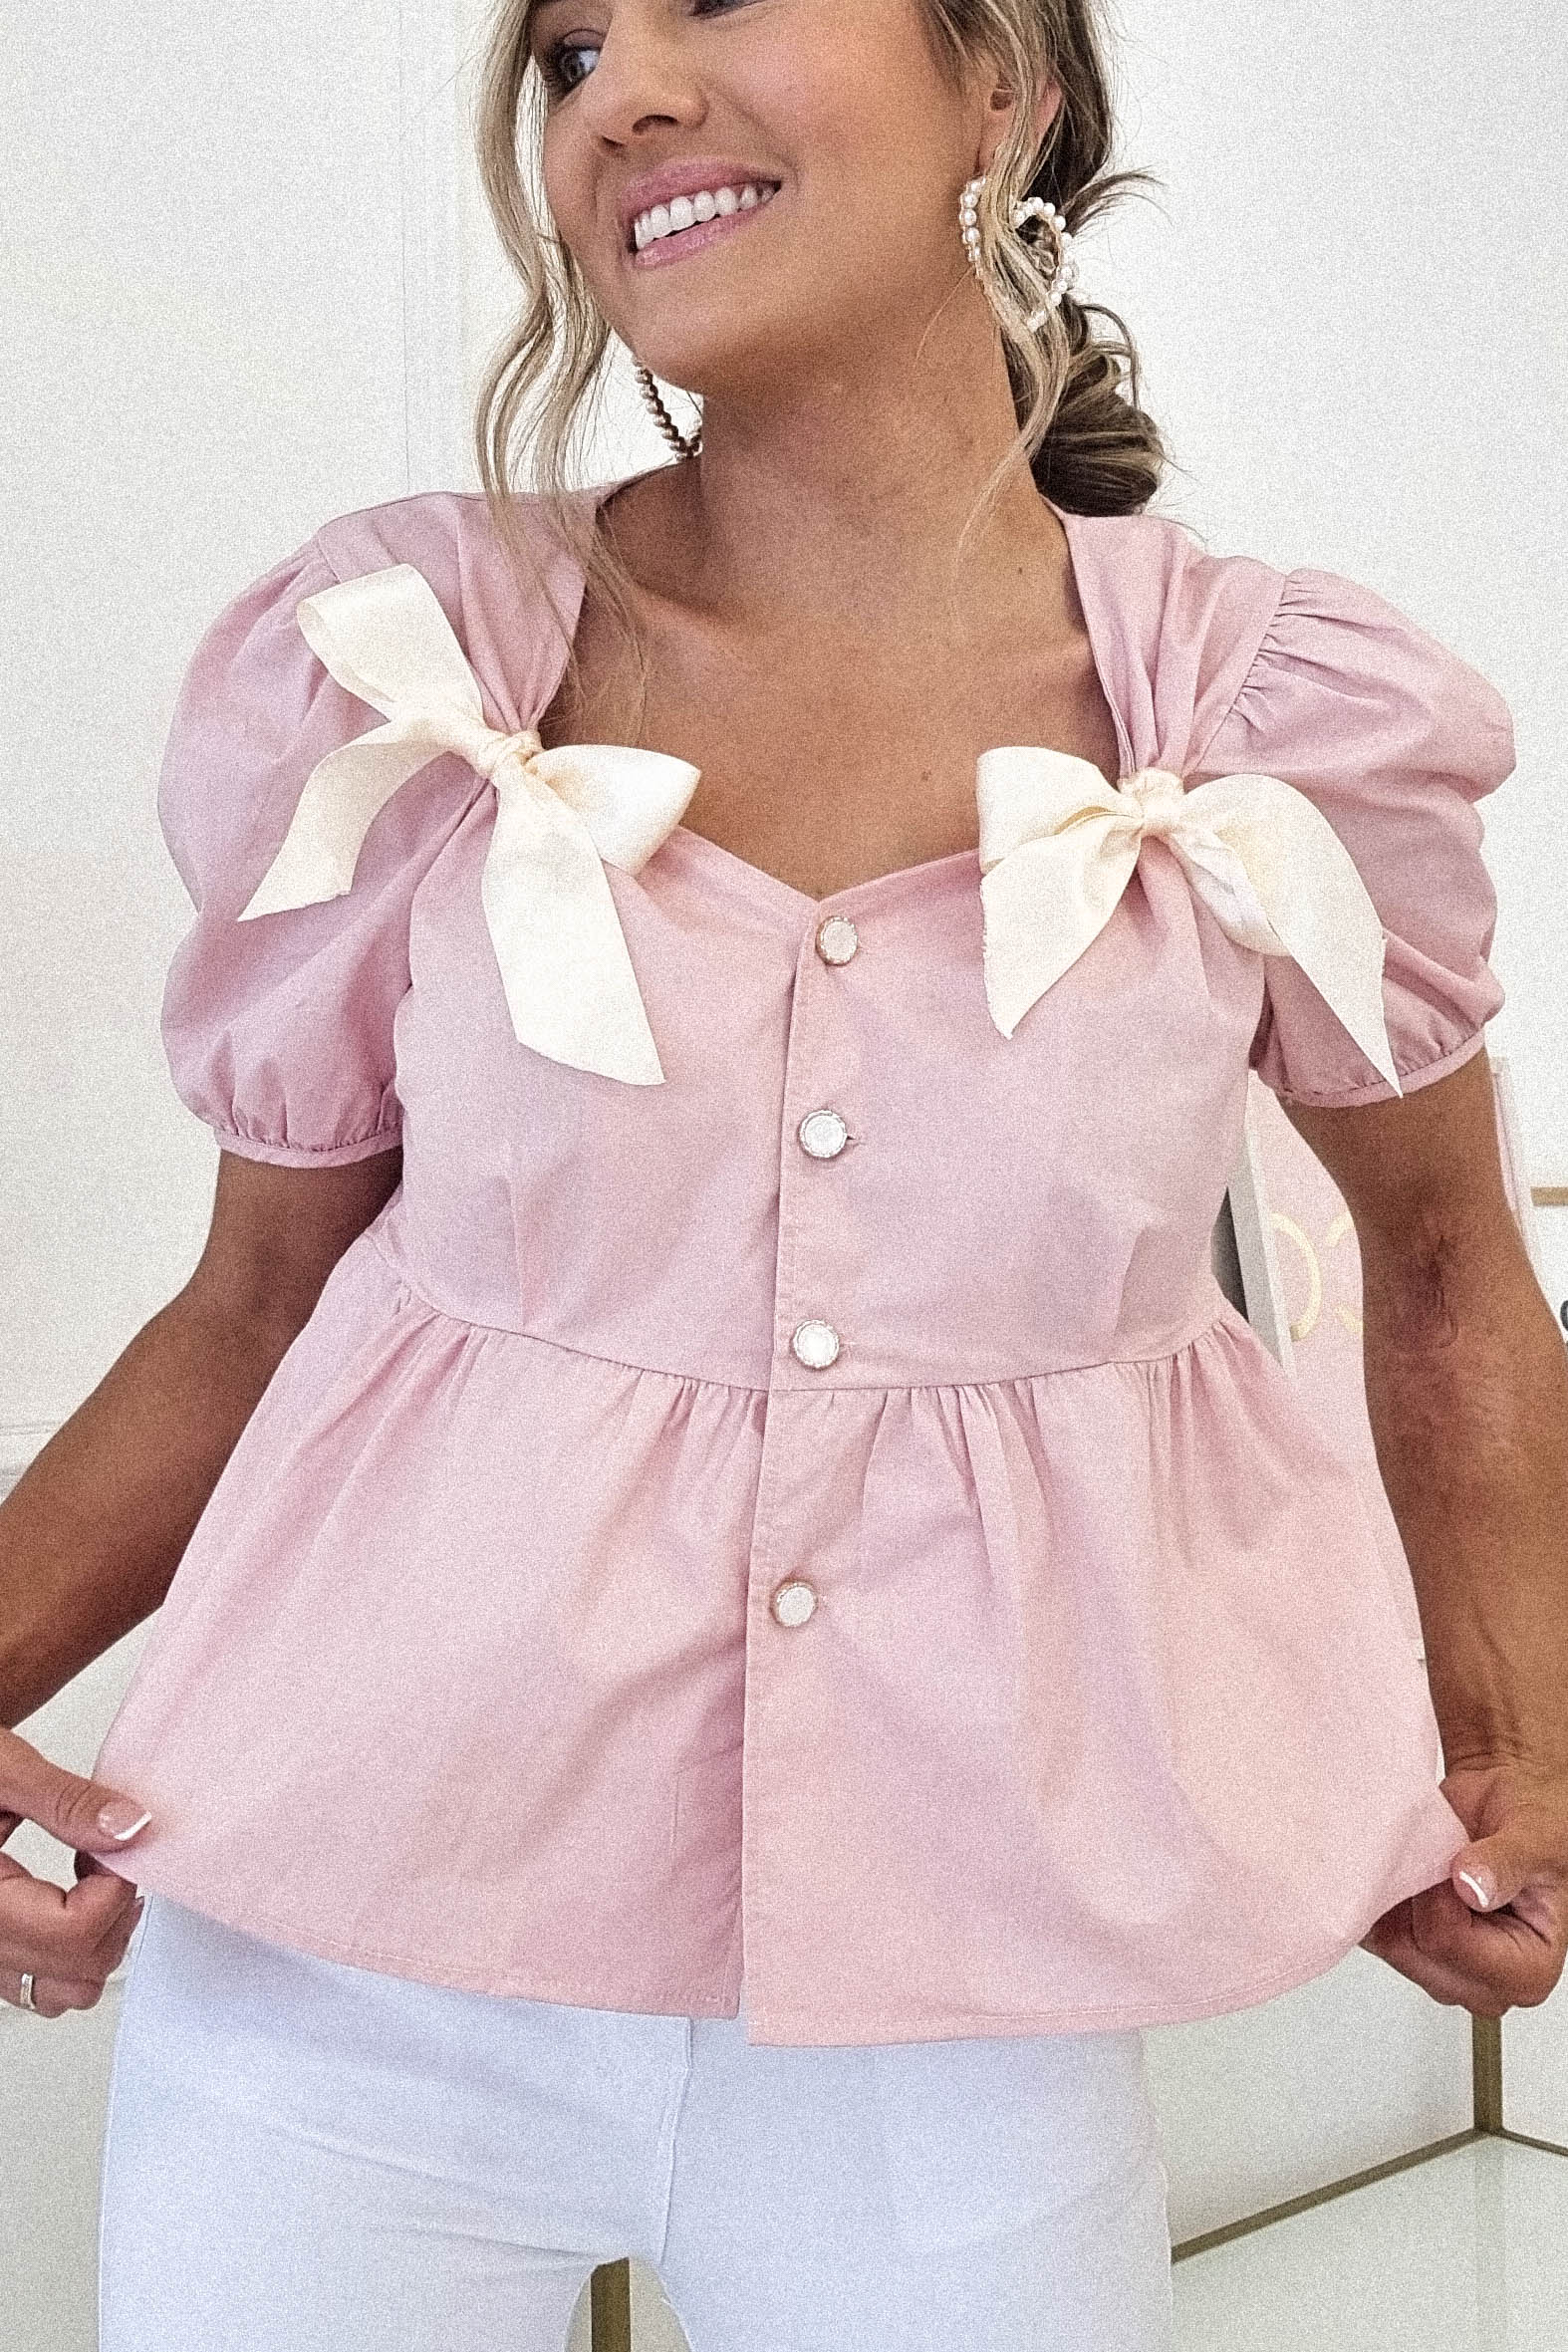 minnie-bow-detail-blouse-pink-minnie-bow-detail-blouse-pink-oh-hello-clothing-28248538513473.jpg